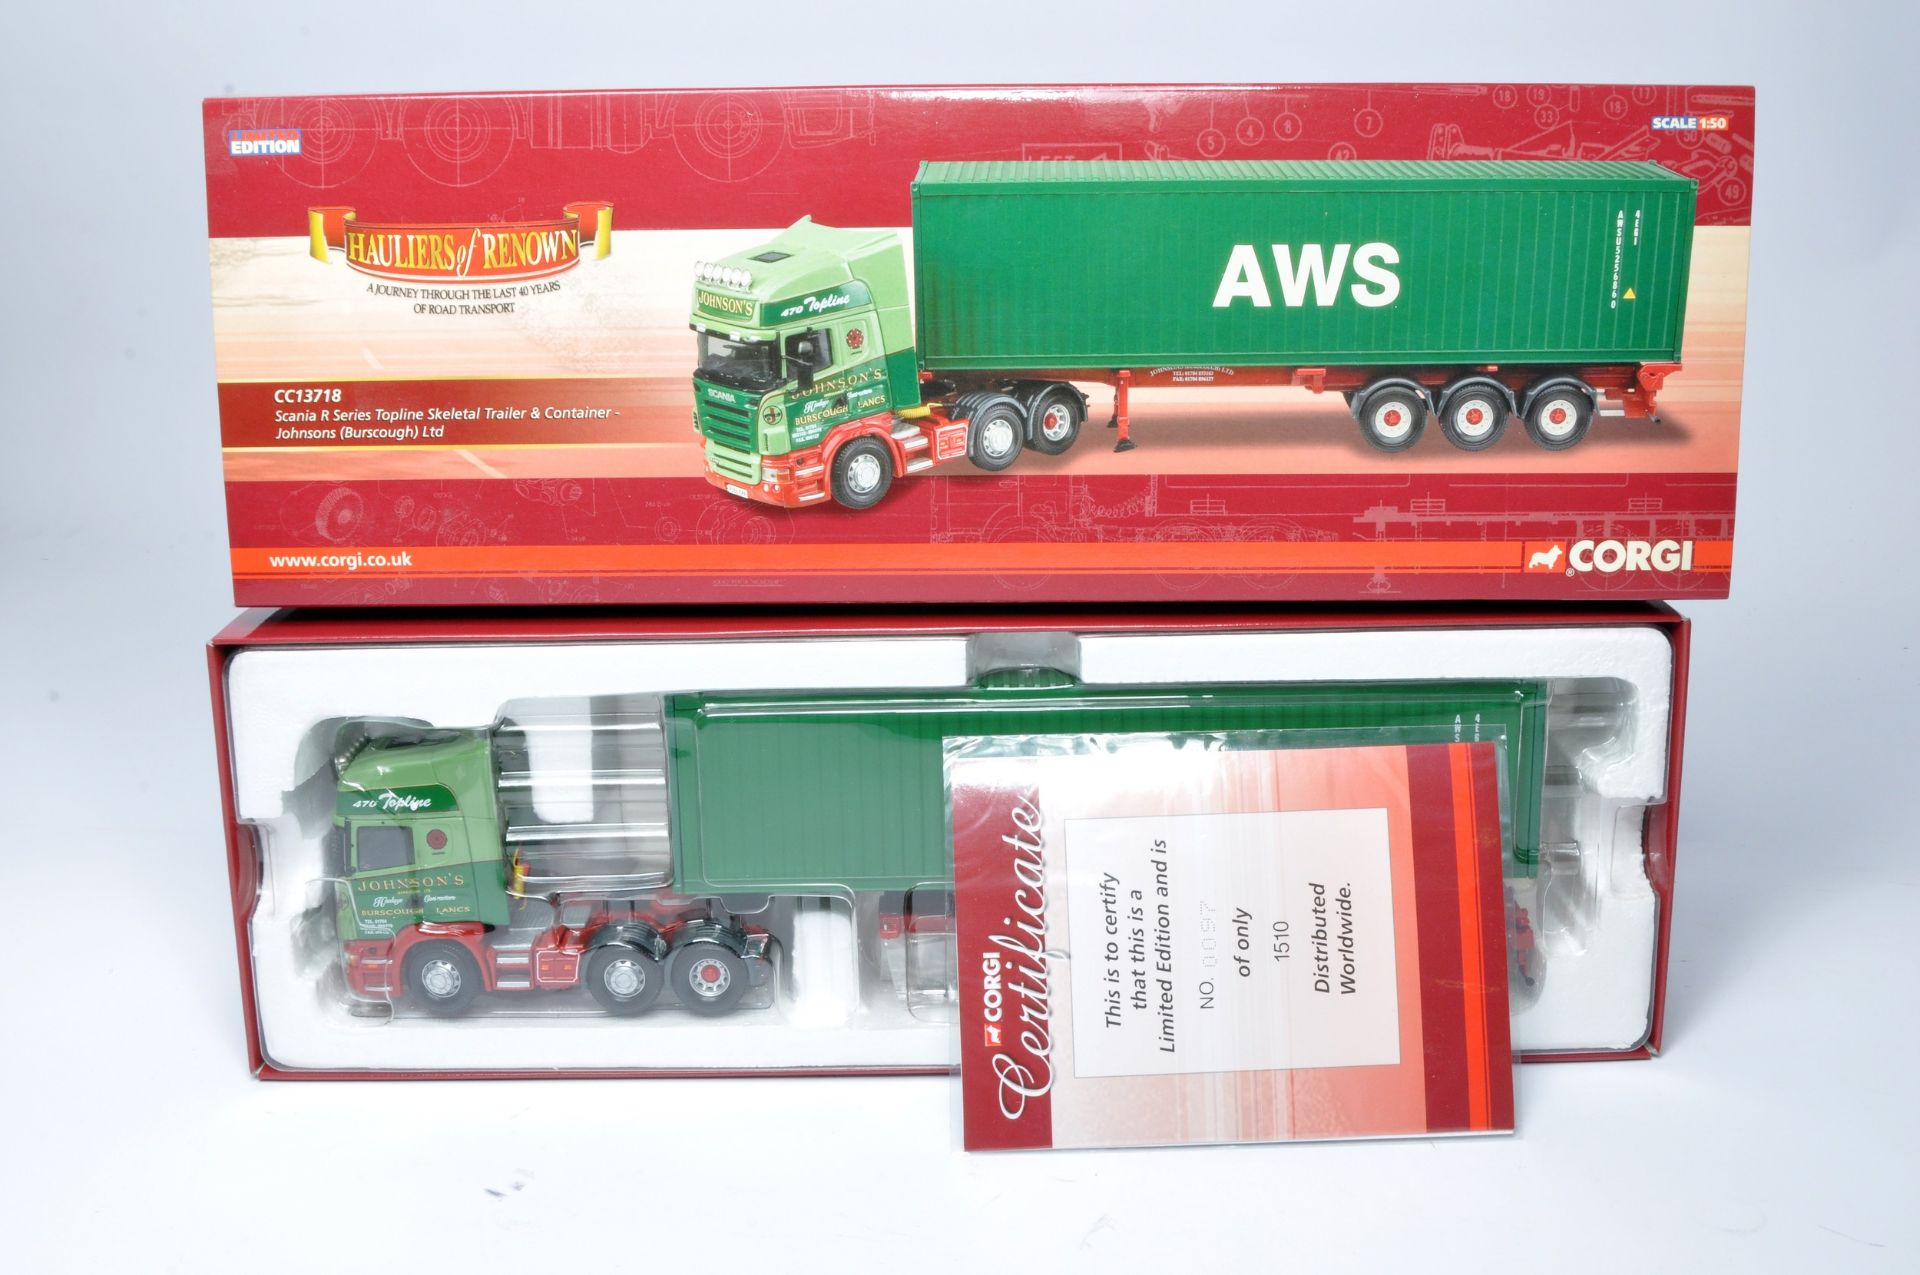 Corgi 1/50 diecast model truck issue comprising No. CC13718 Scania R Series Container Trailer in the